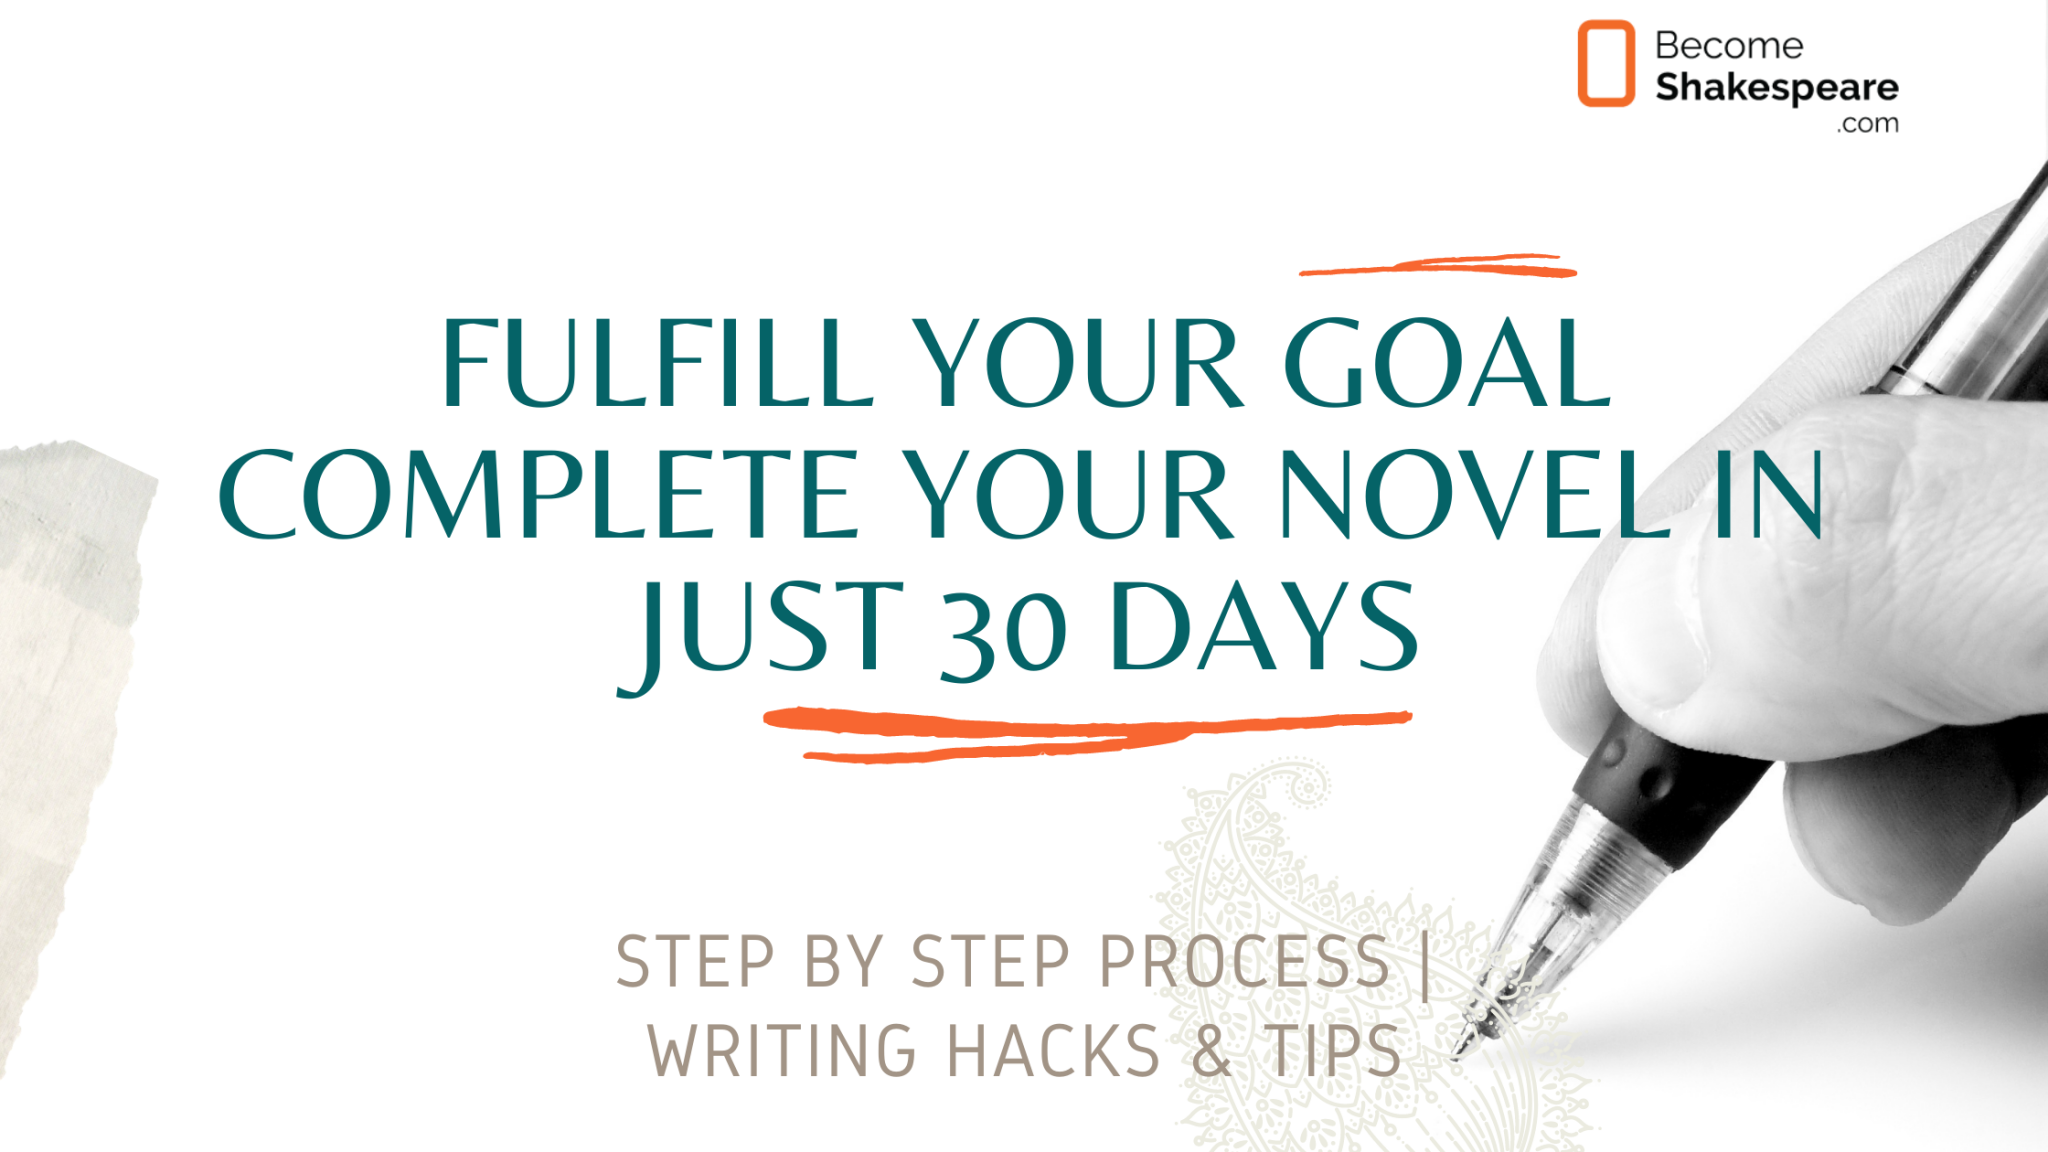 How to Write a Novel in 30 Days? Here are the 30 steps to follow